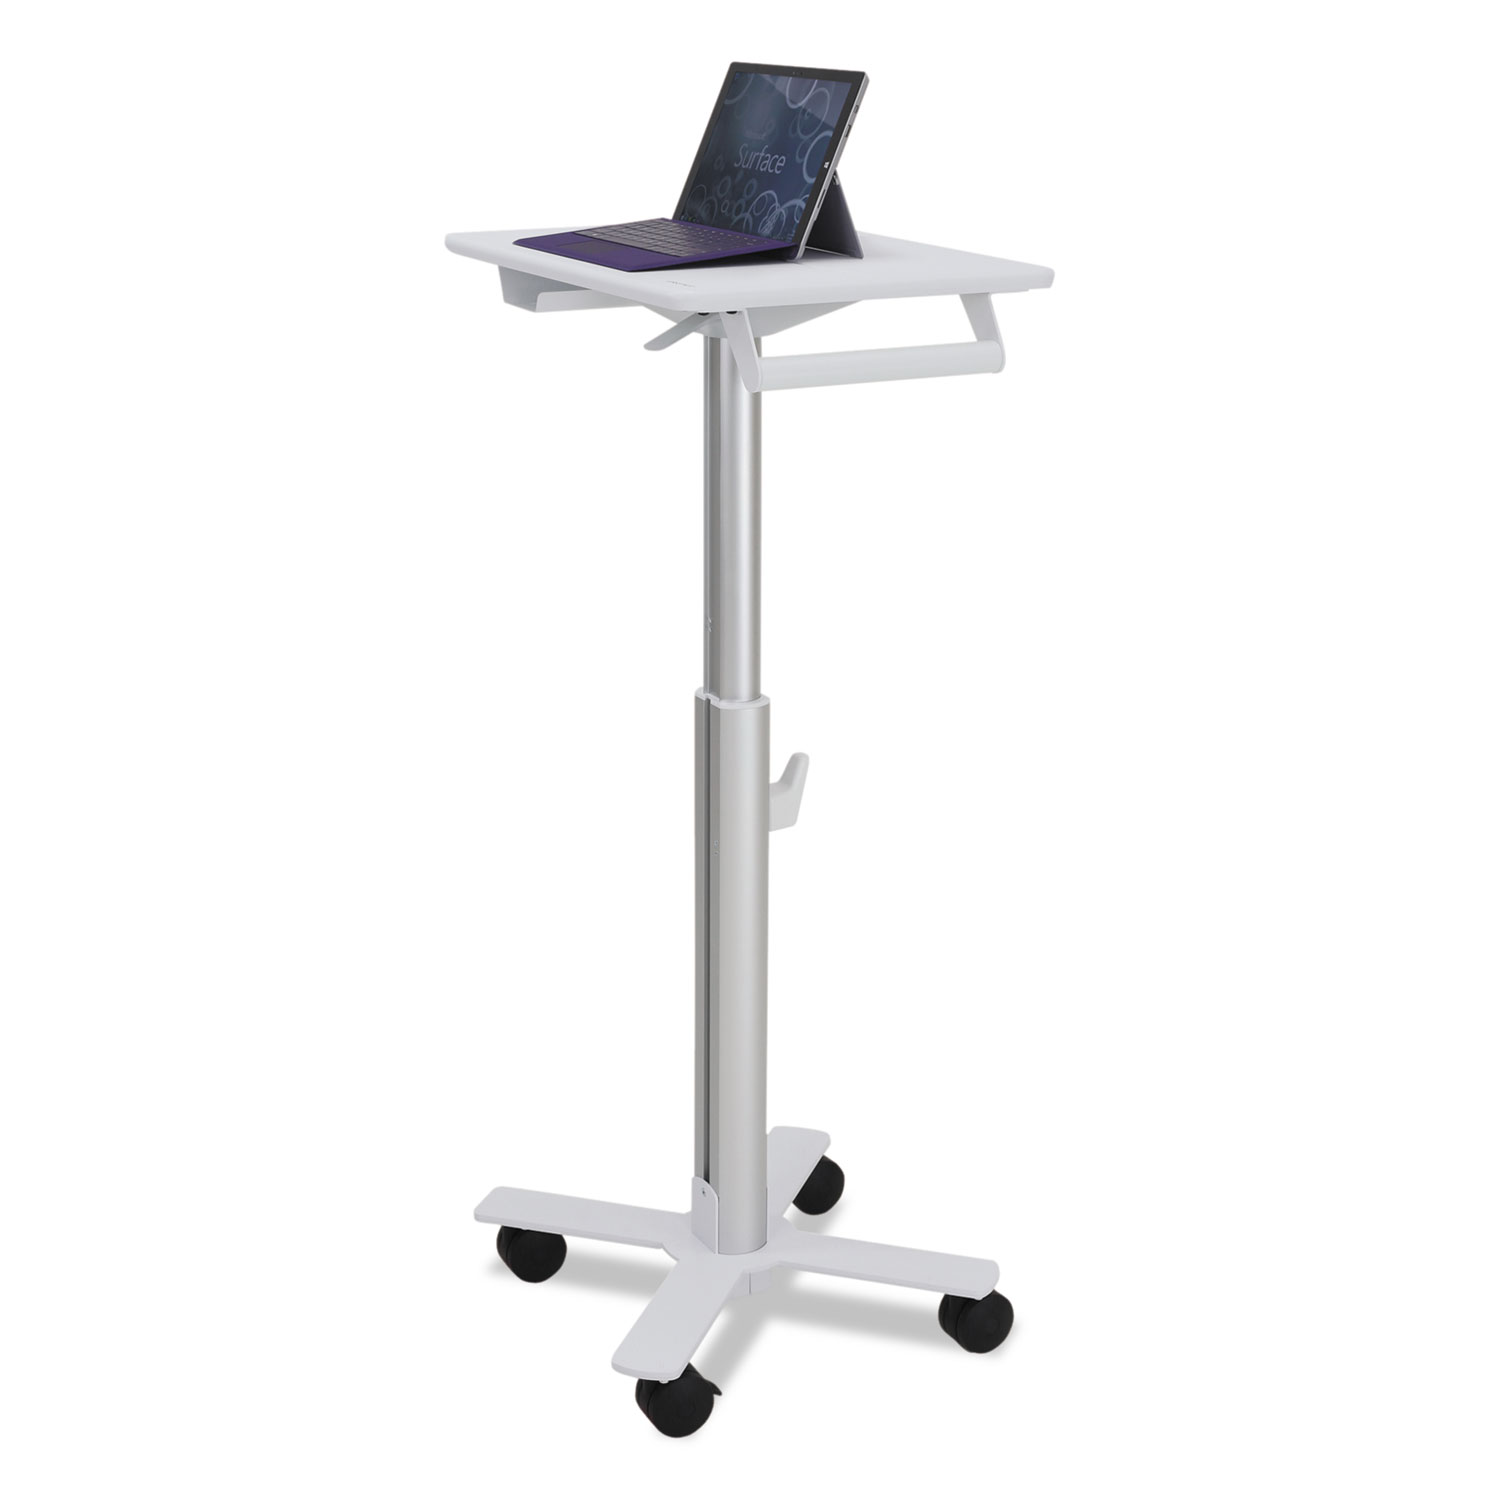  Ergotron SV10-1800-0 StyleView 10 S-Tablet Cart for MS Surface, 19w x 19d x 33 to 48h, White/Aluminum (ERGSV1018000) 